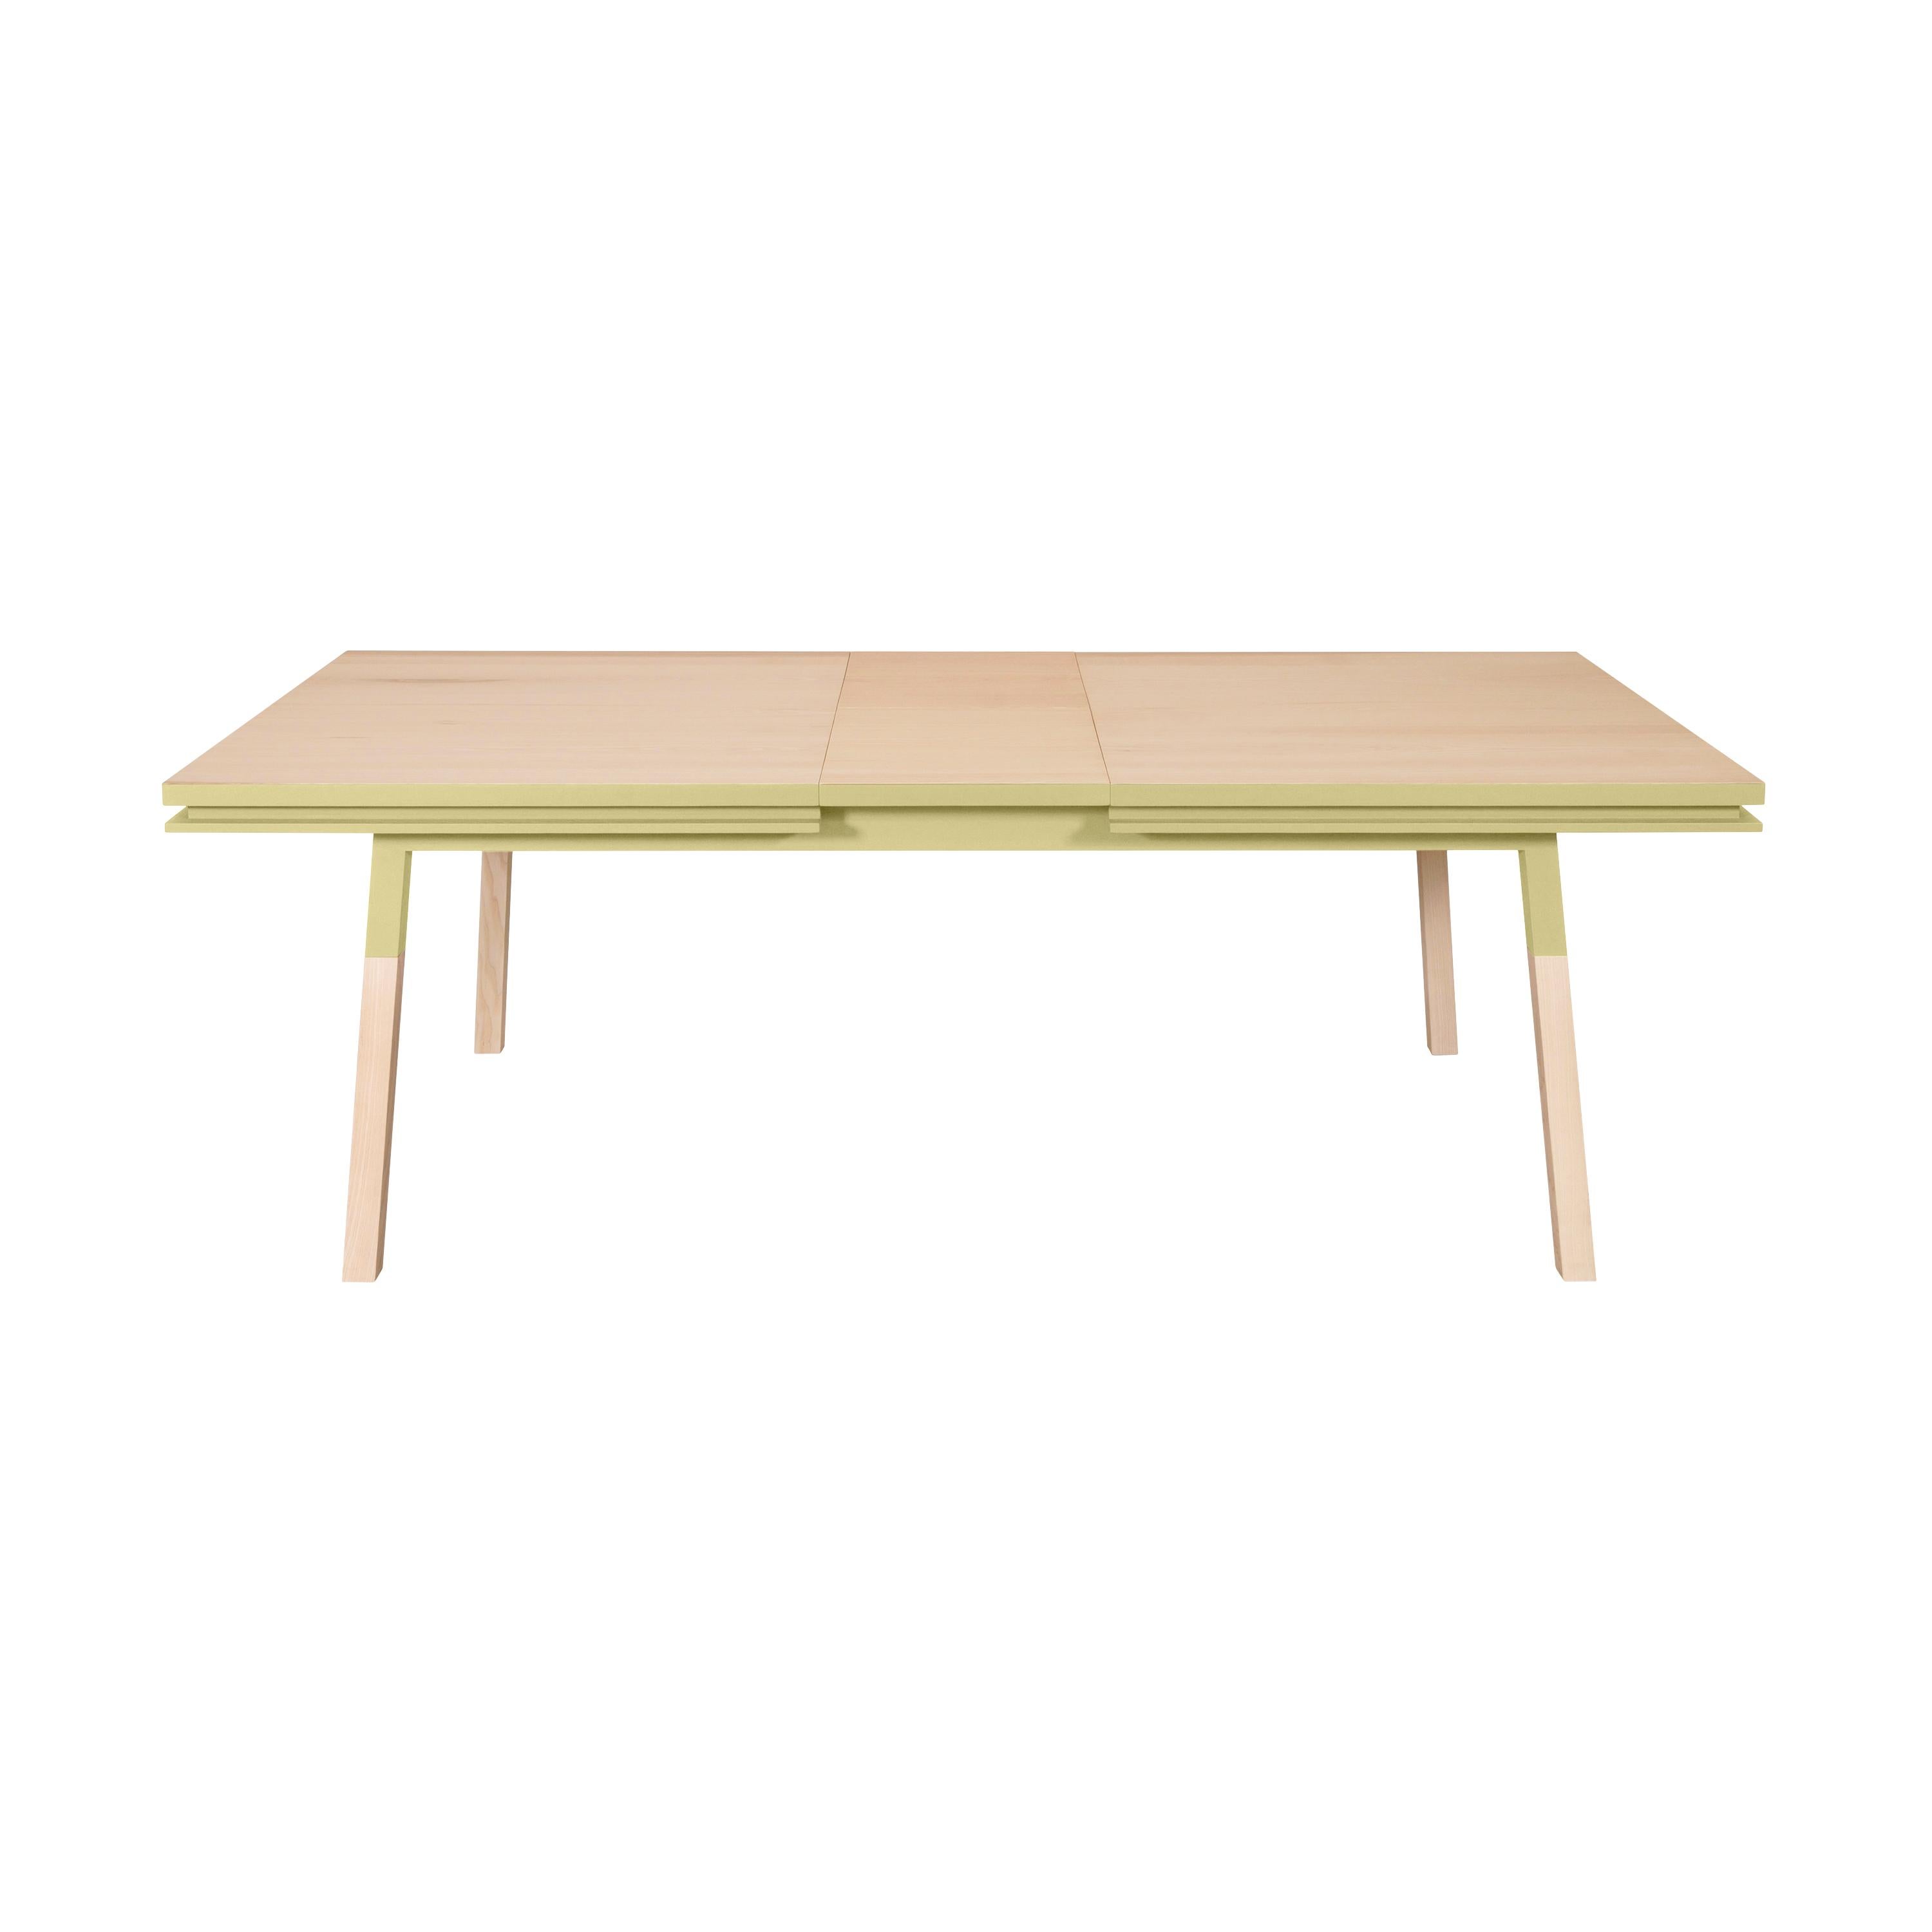 Ash Yellow short pants finish for this extensible dining table in solid wood For Sale